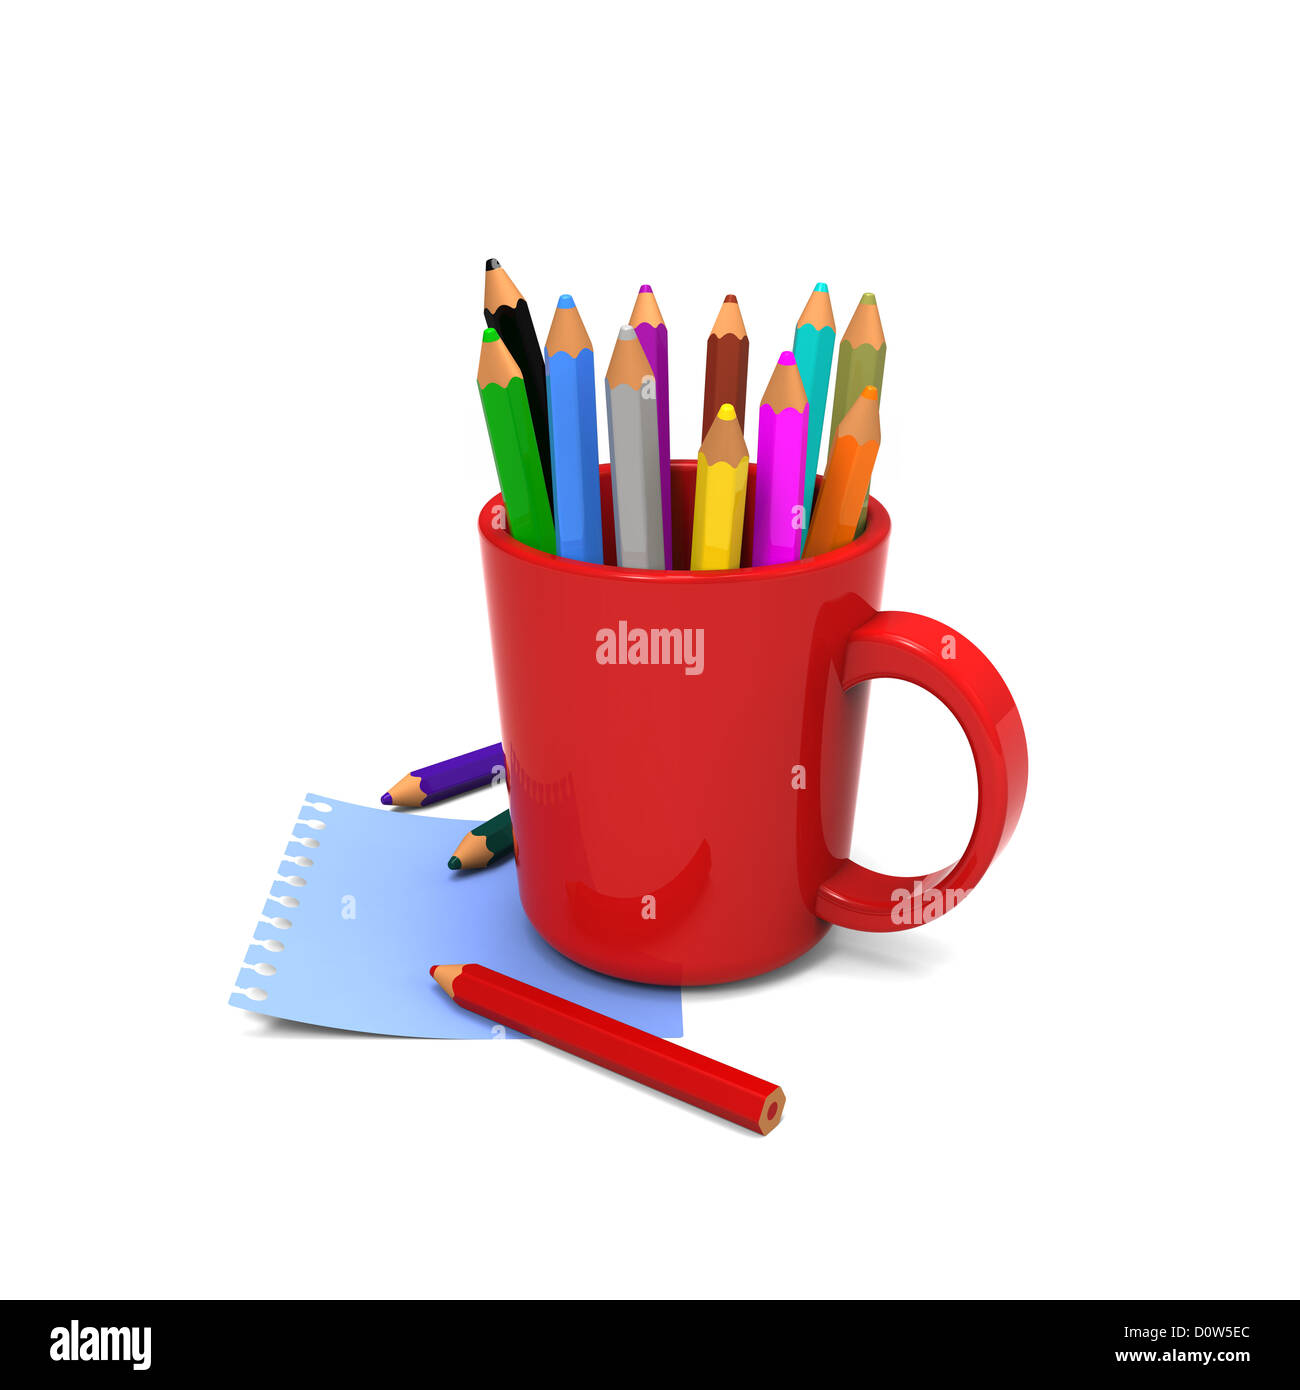 3D model of colored pencils in red cup on blue note message paper Stock Photo